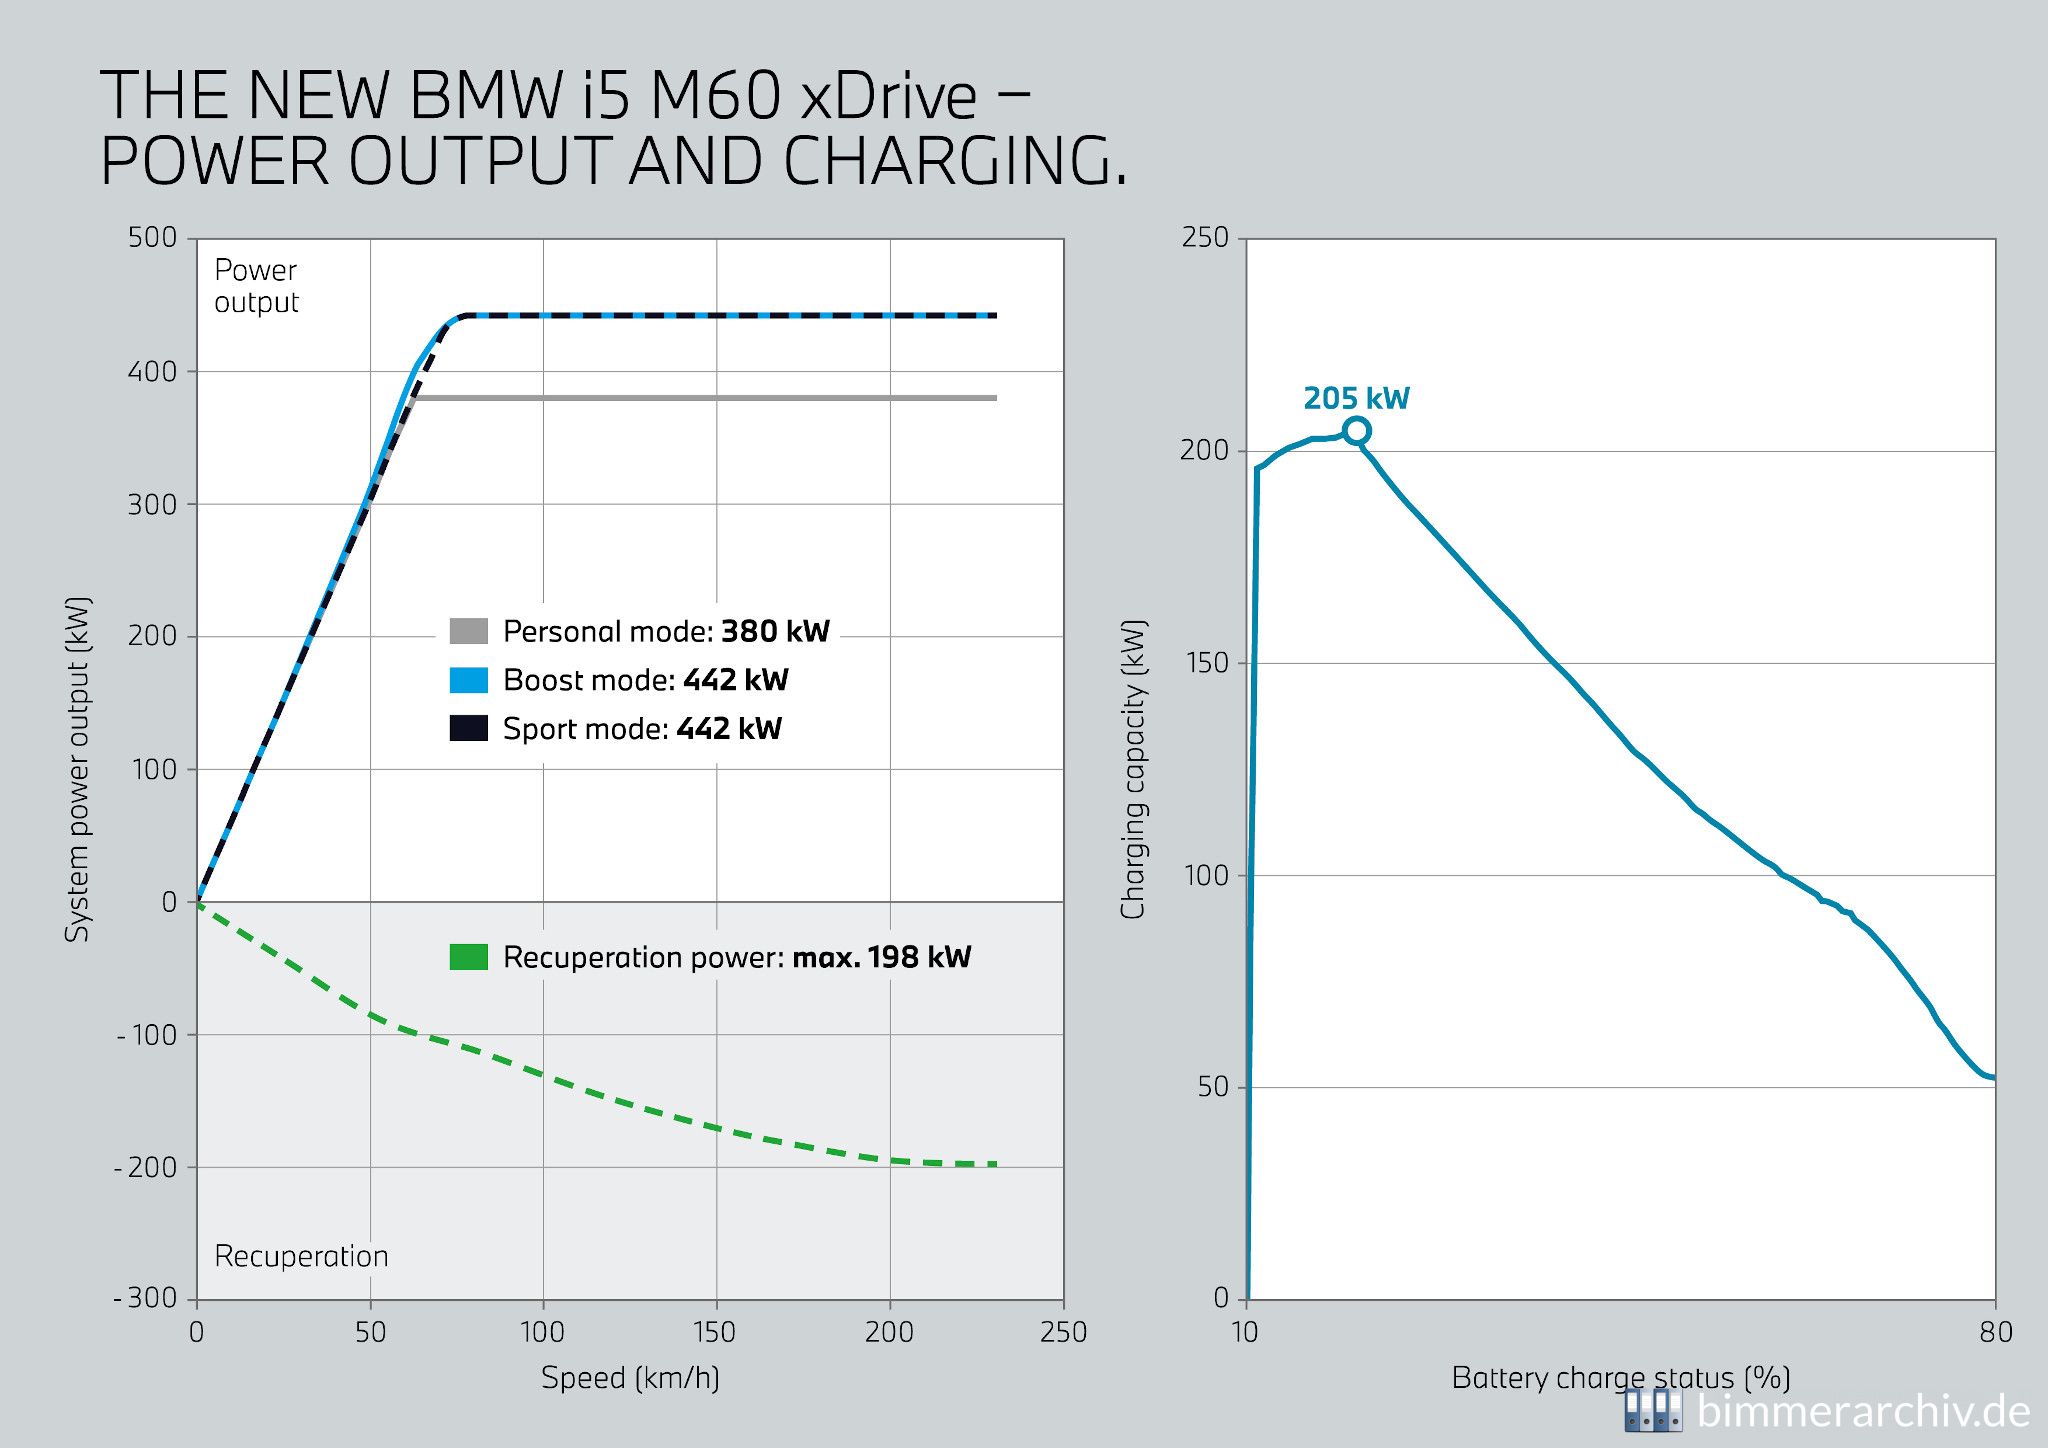 BMW i5 M60 xDrive - Power output and charging